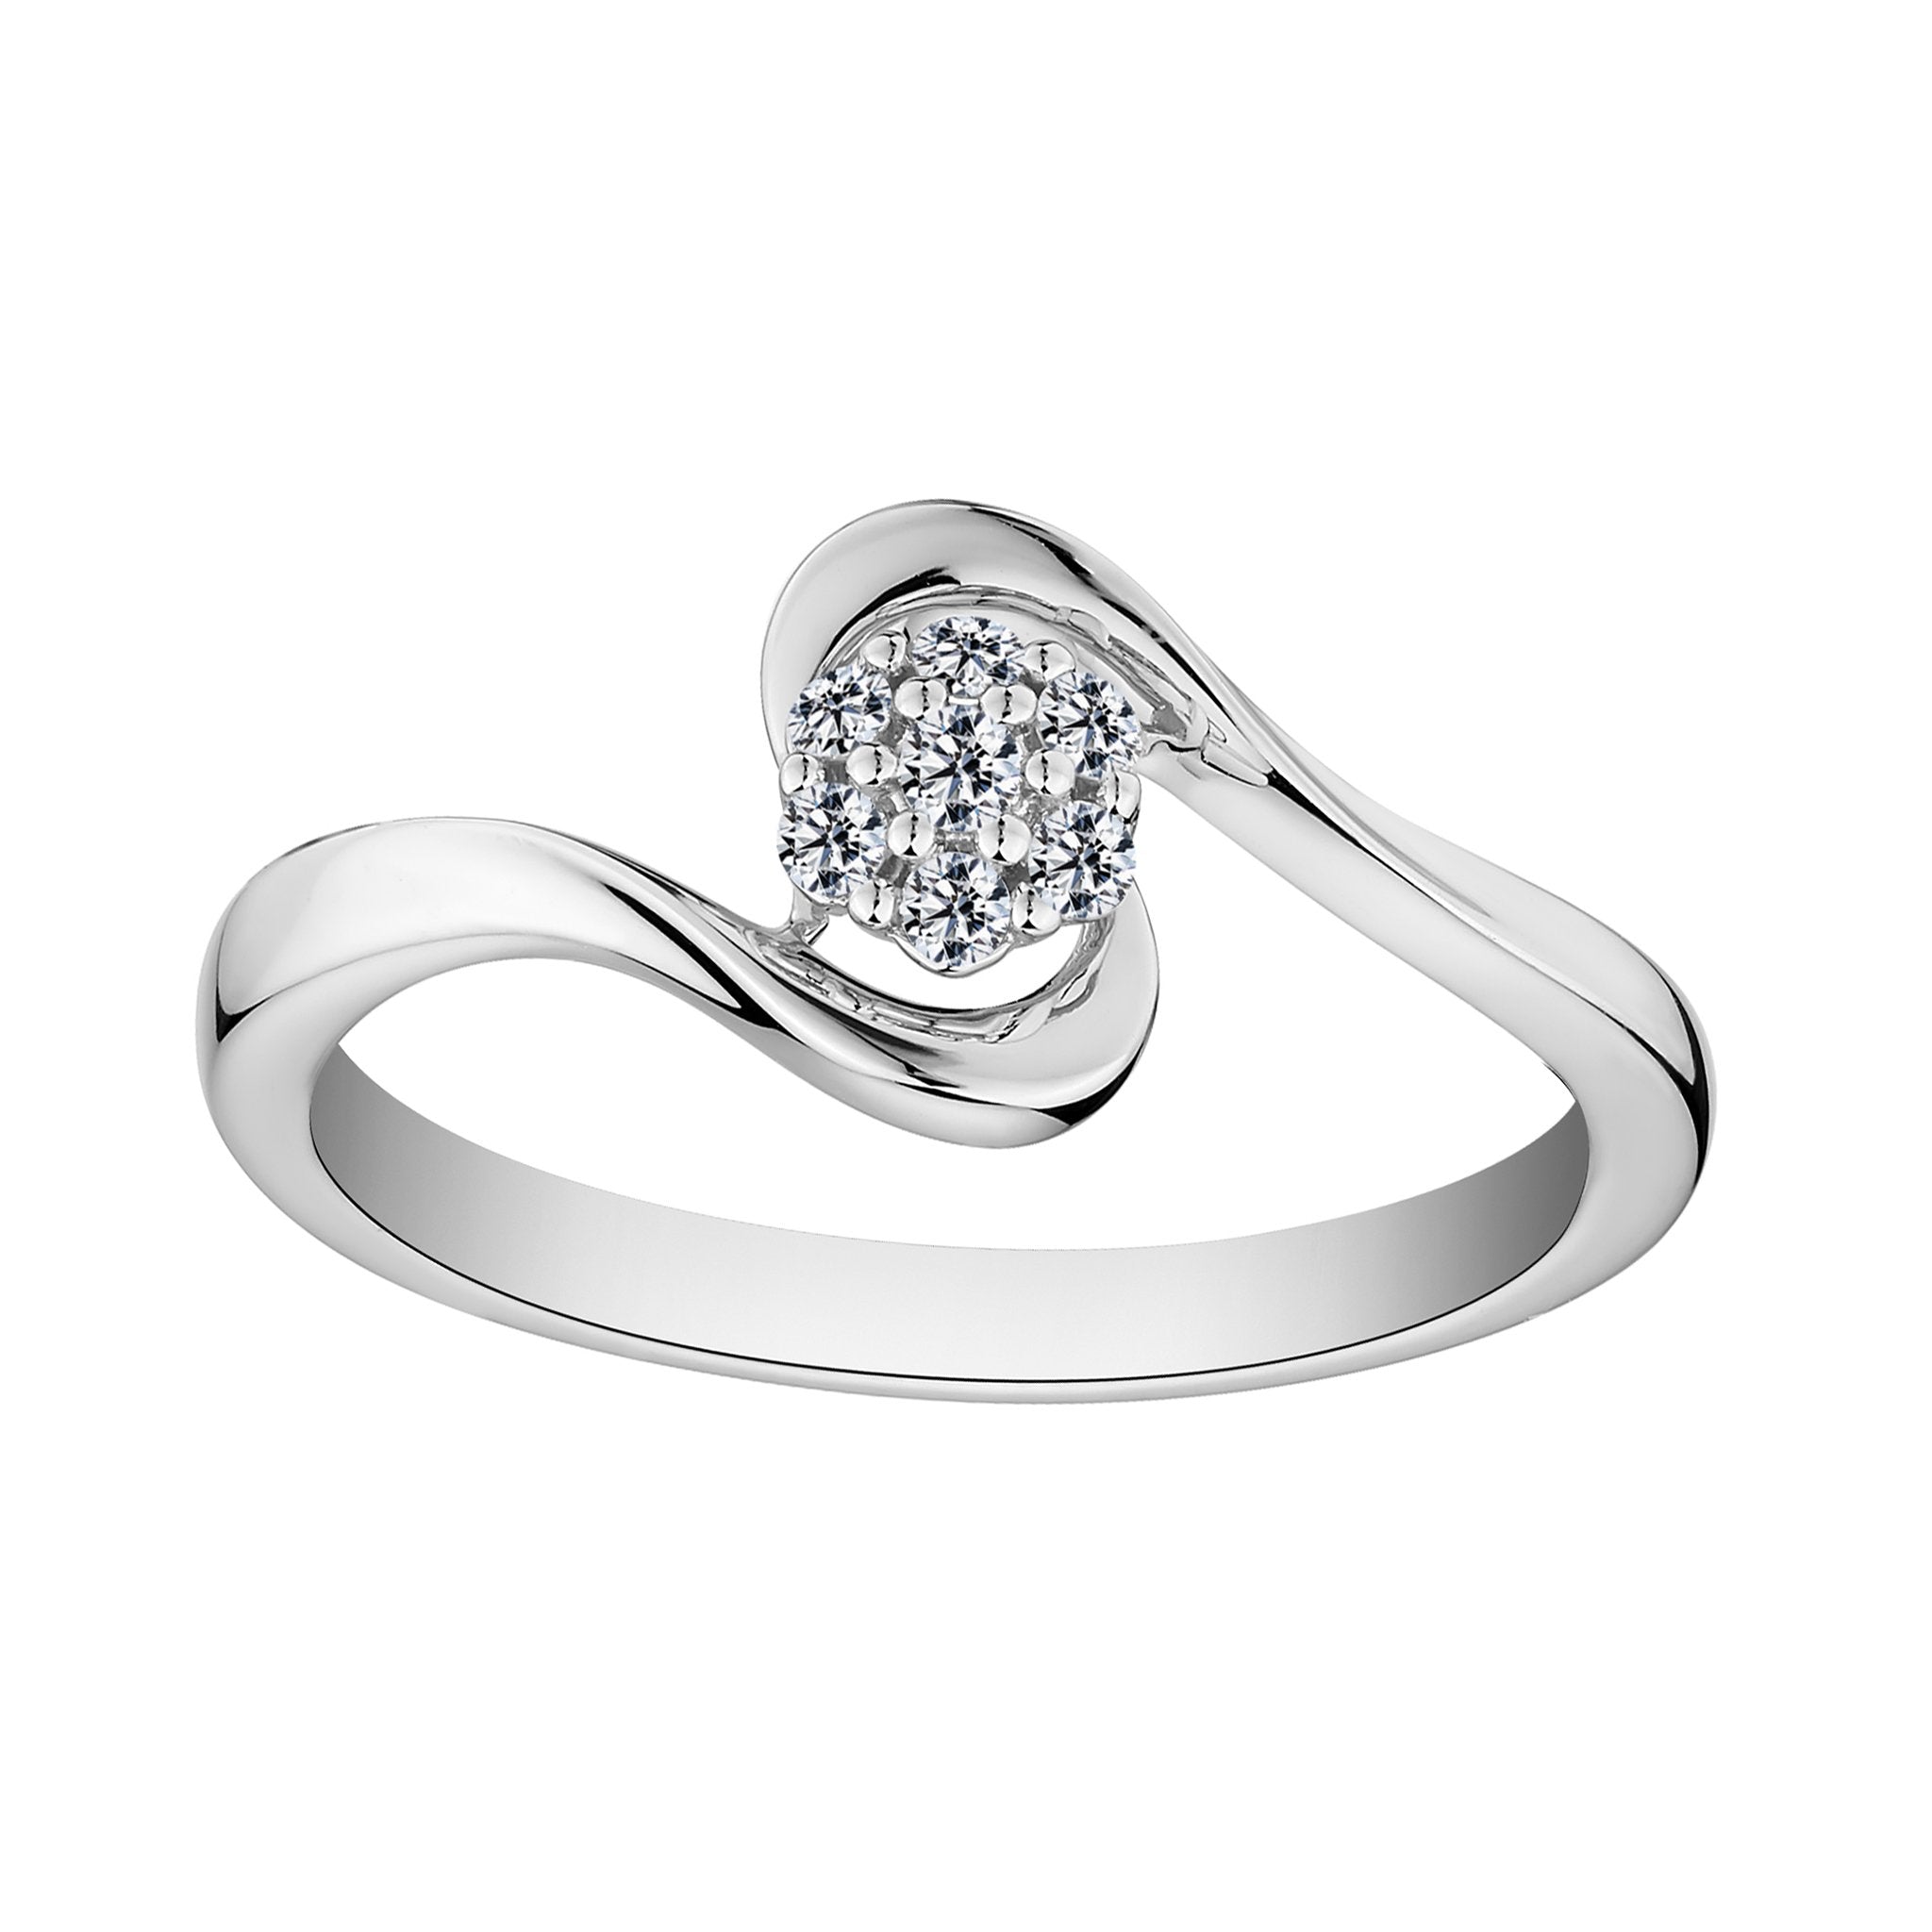 .10 CARAT DIAMOND RING, 10kt WHITE GOLD. Fashion Rings - Griffin Jewellery Designs